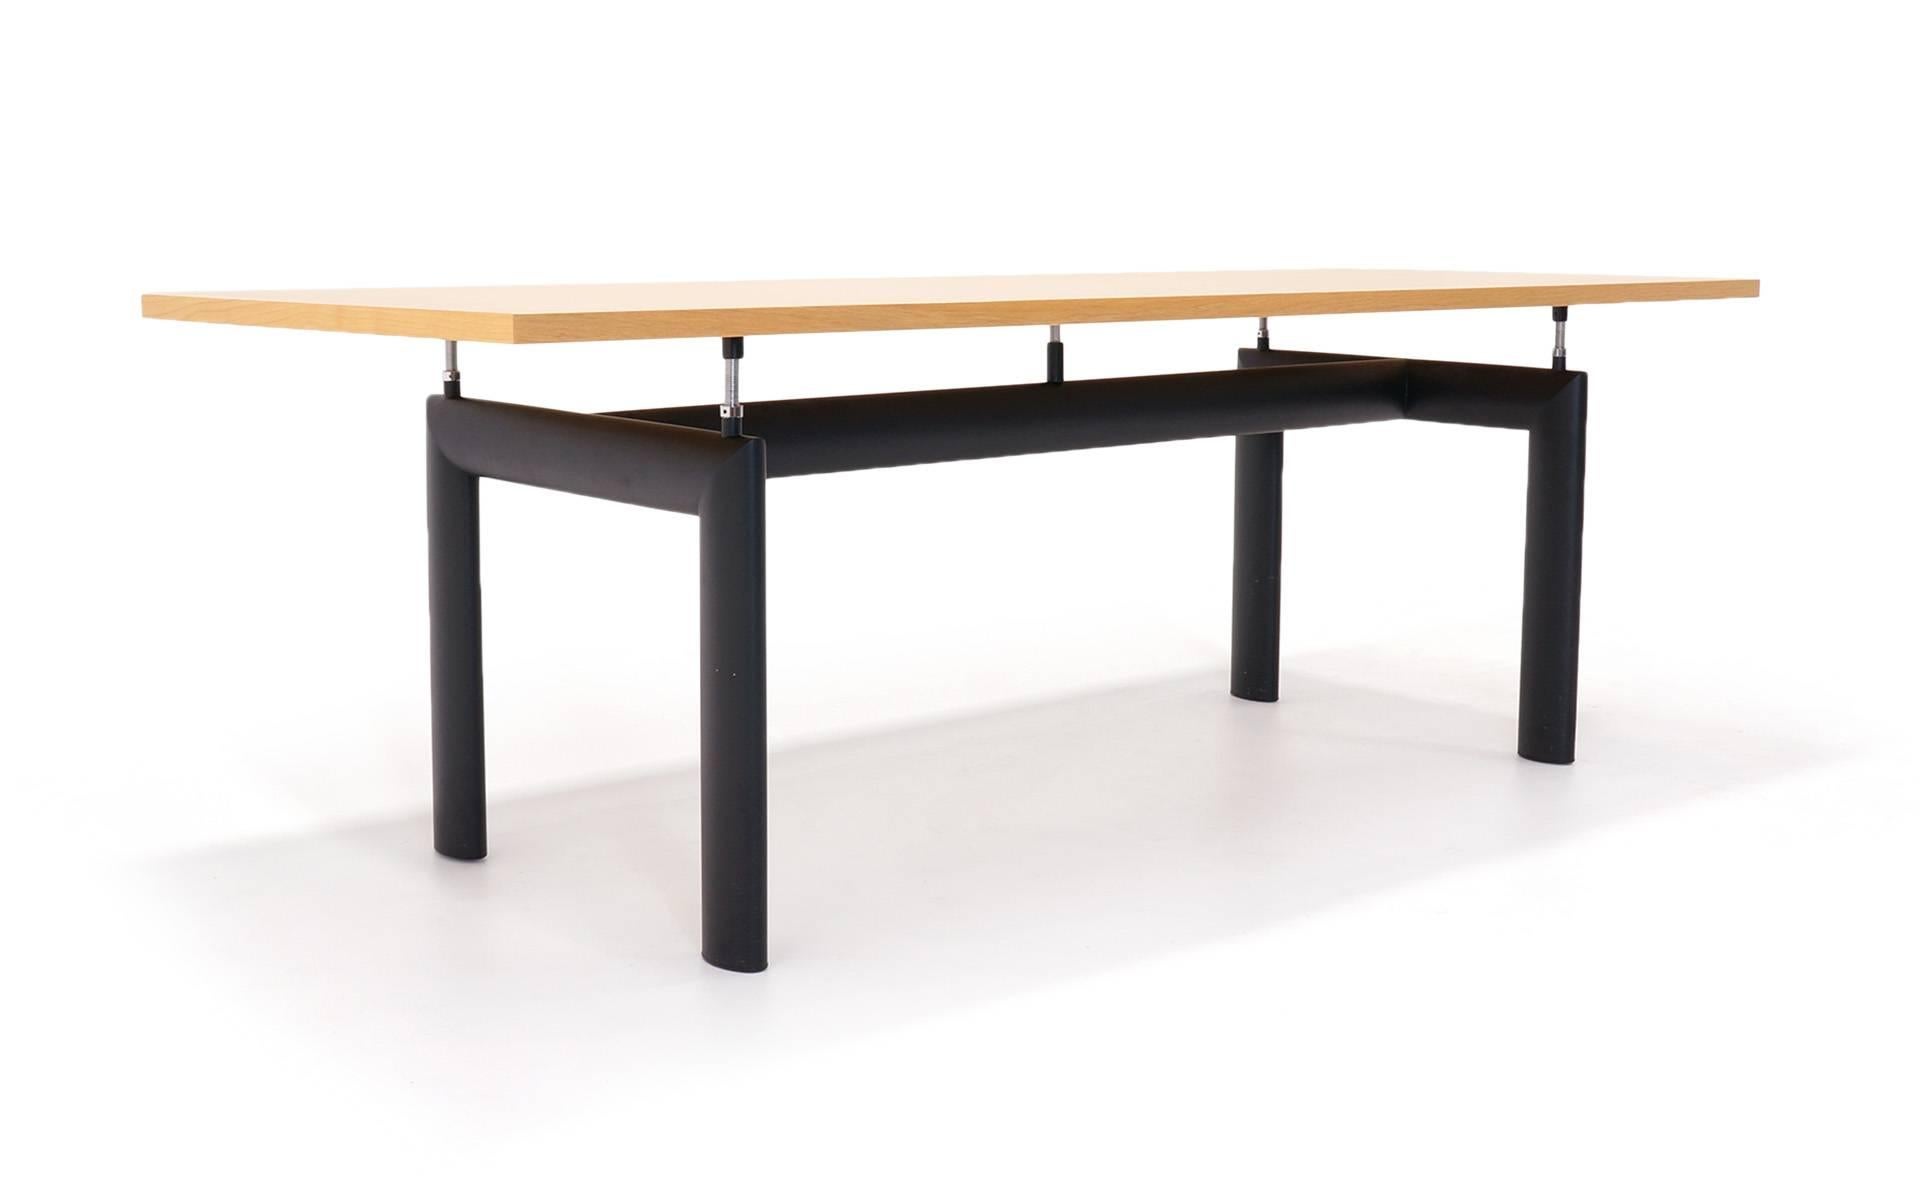 Beautiful Le Corbusier LC6 dining table. This would also make a great desk or conference table. Condition is excellent.